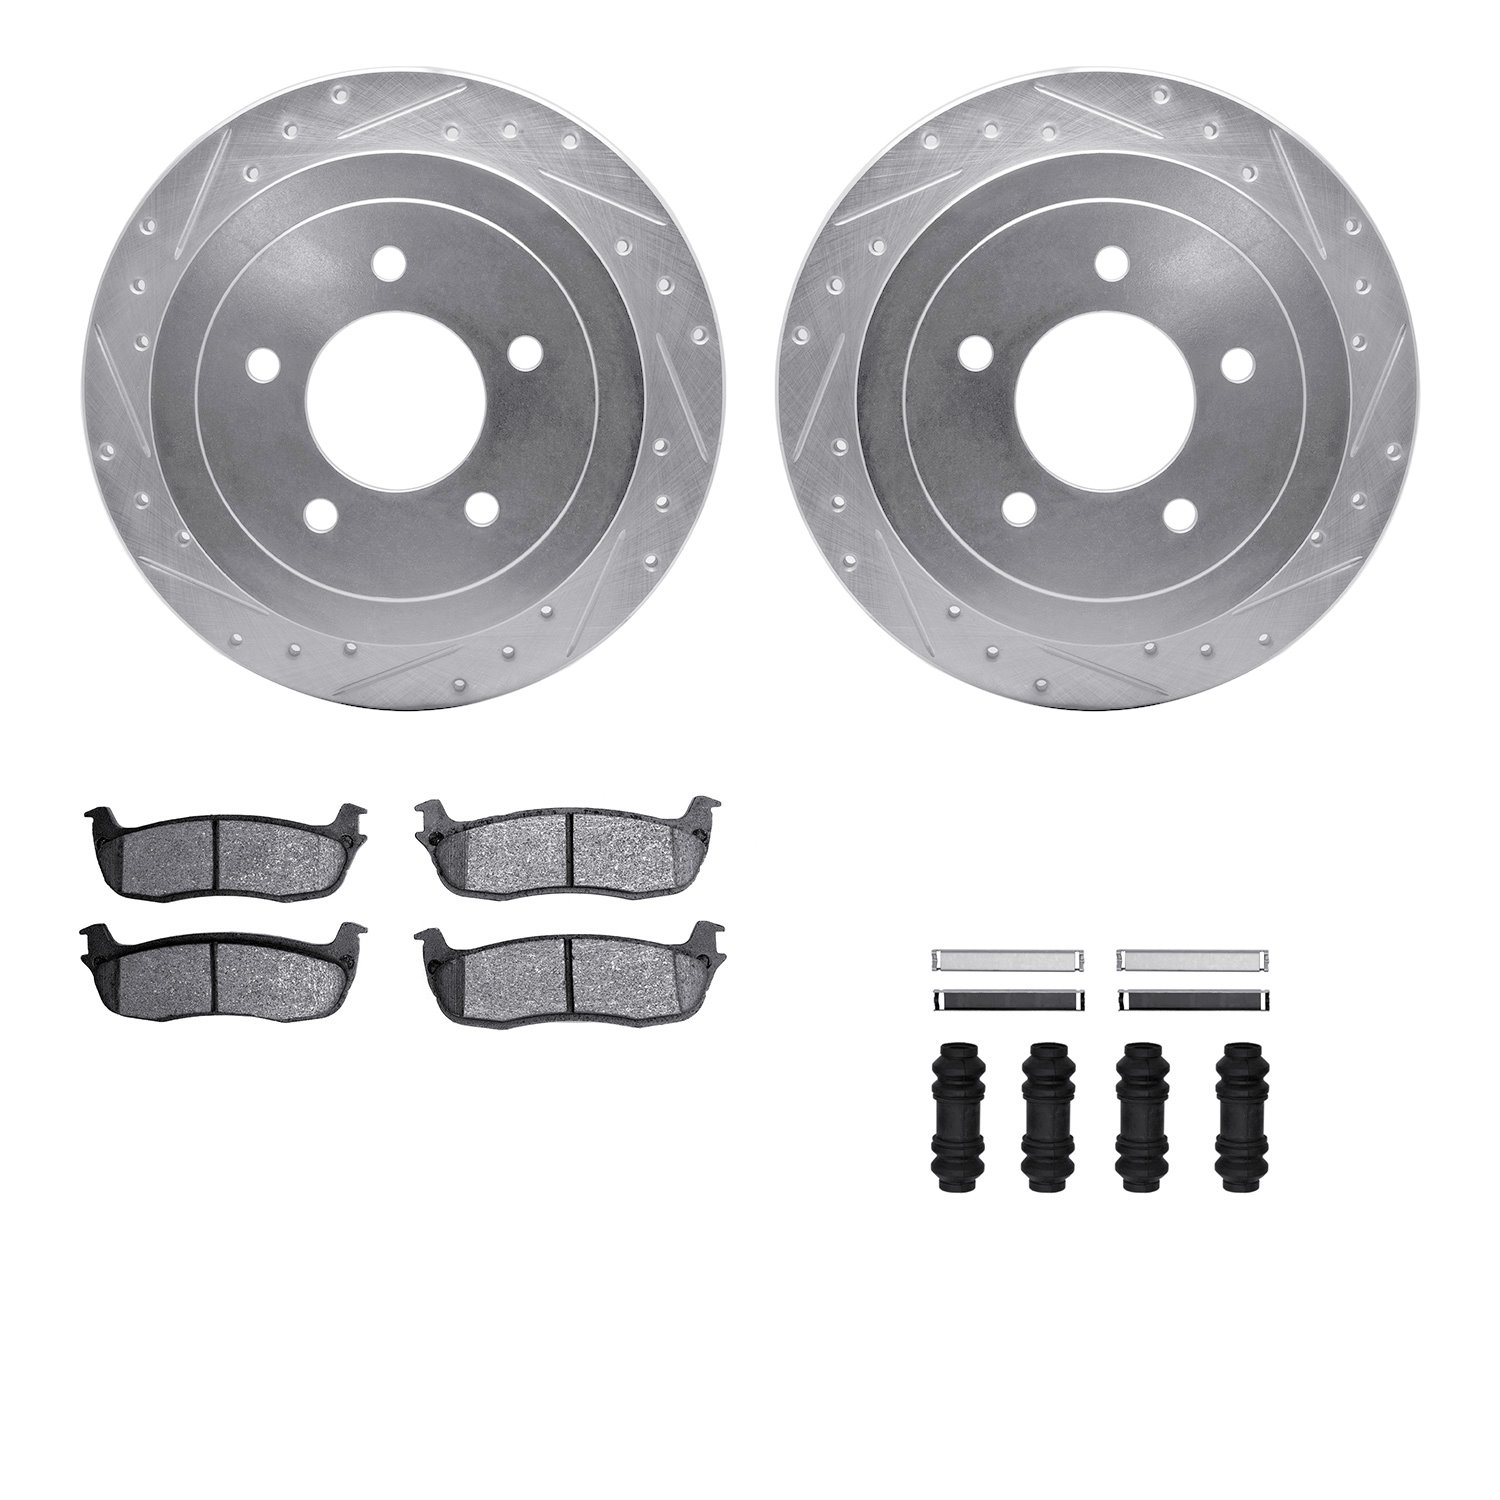 7412-54061 Drilled/Slotted Brake Rotors with Ultimate-Duty Brake Pads Kit & Hardware [Silver], 1997-2004 Ford/Lincoln/Mercury/Ma